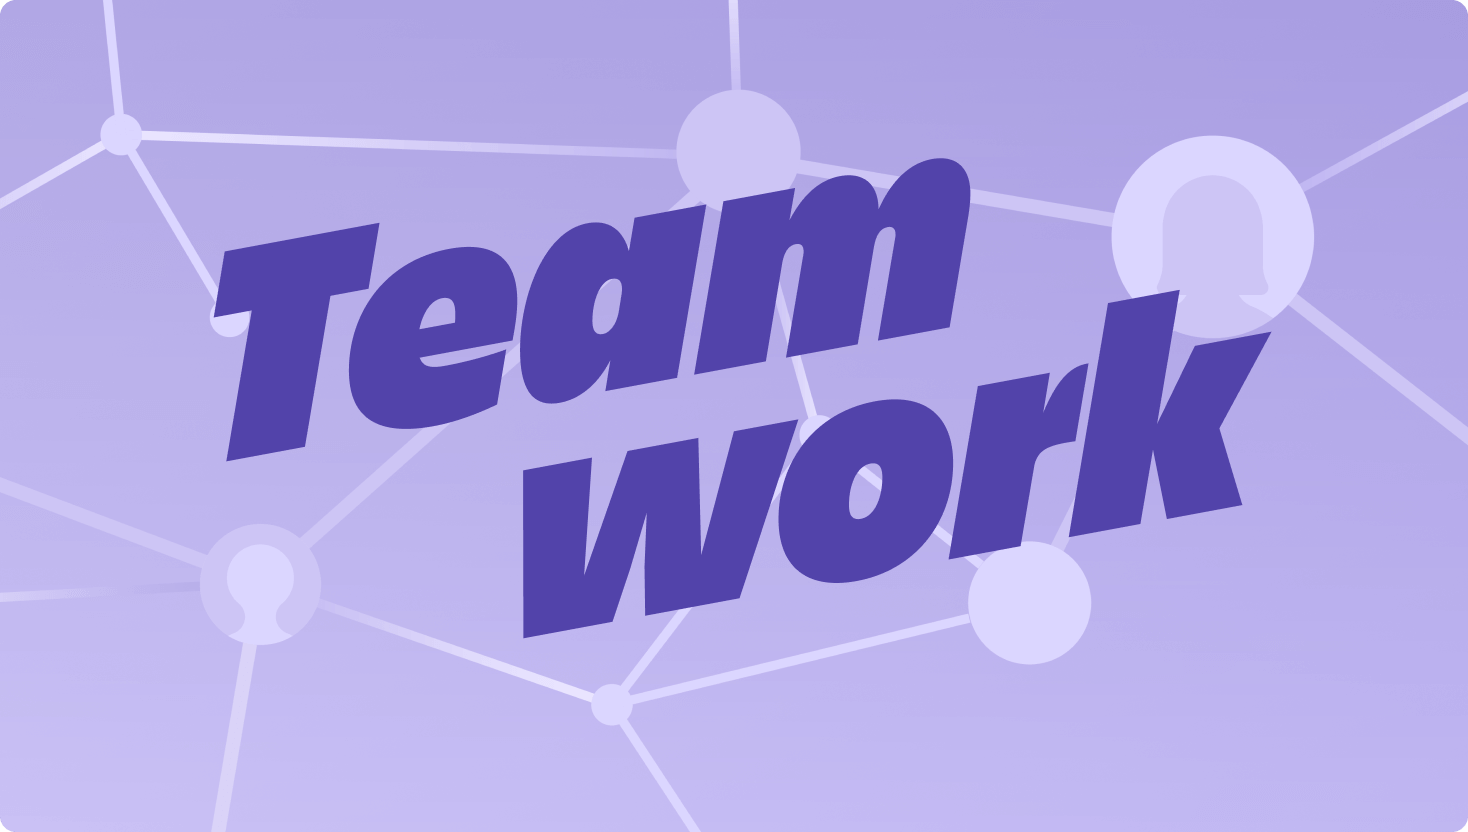 A purple image of connecting nodes in a network with the word Teamwork prominently featured